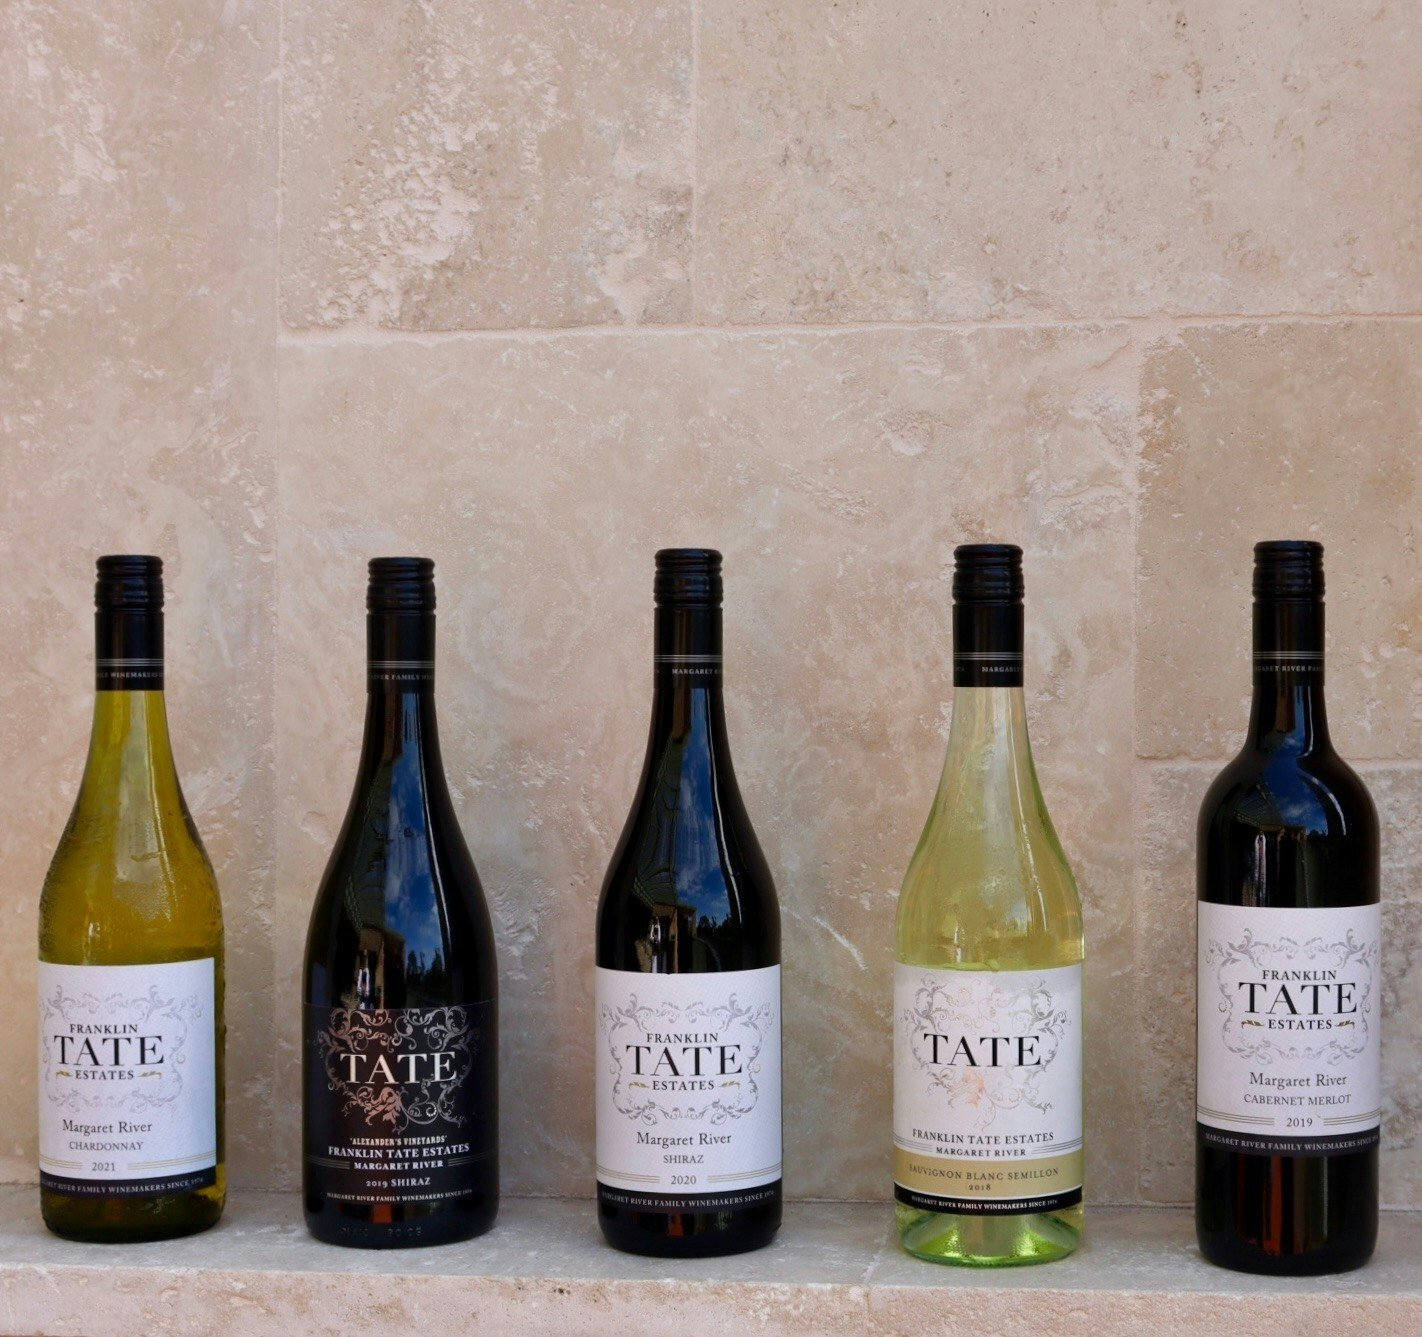 Franklin Tate Estate was founded and owned by Frank and Heather Tate. Second generation winemakers in Margaret River. The Tate family has been making award winning wines since 1969.